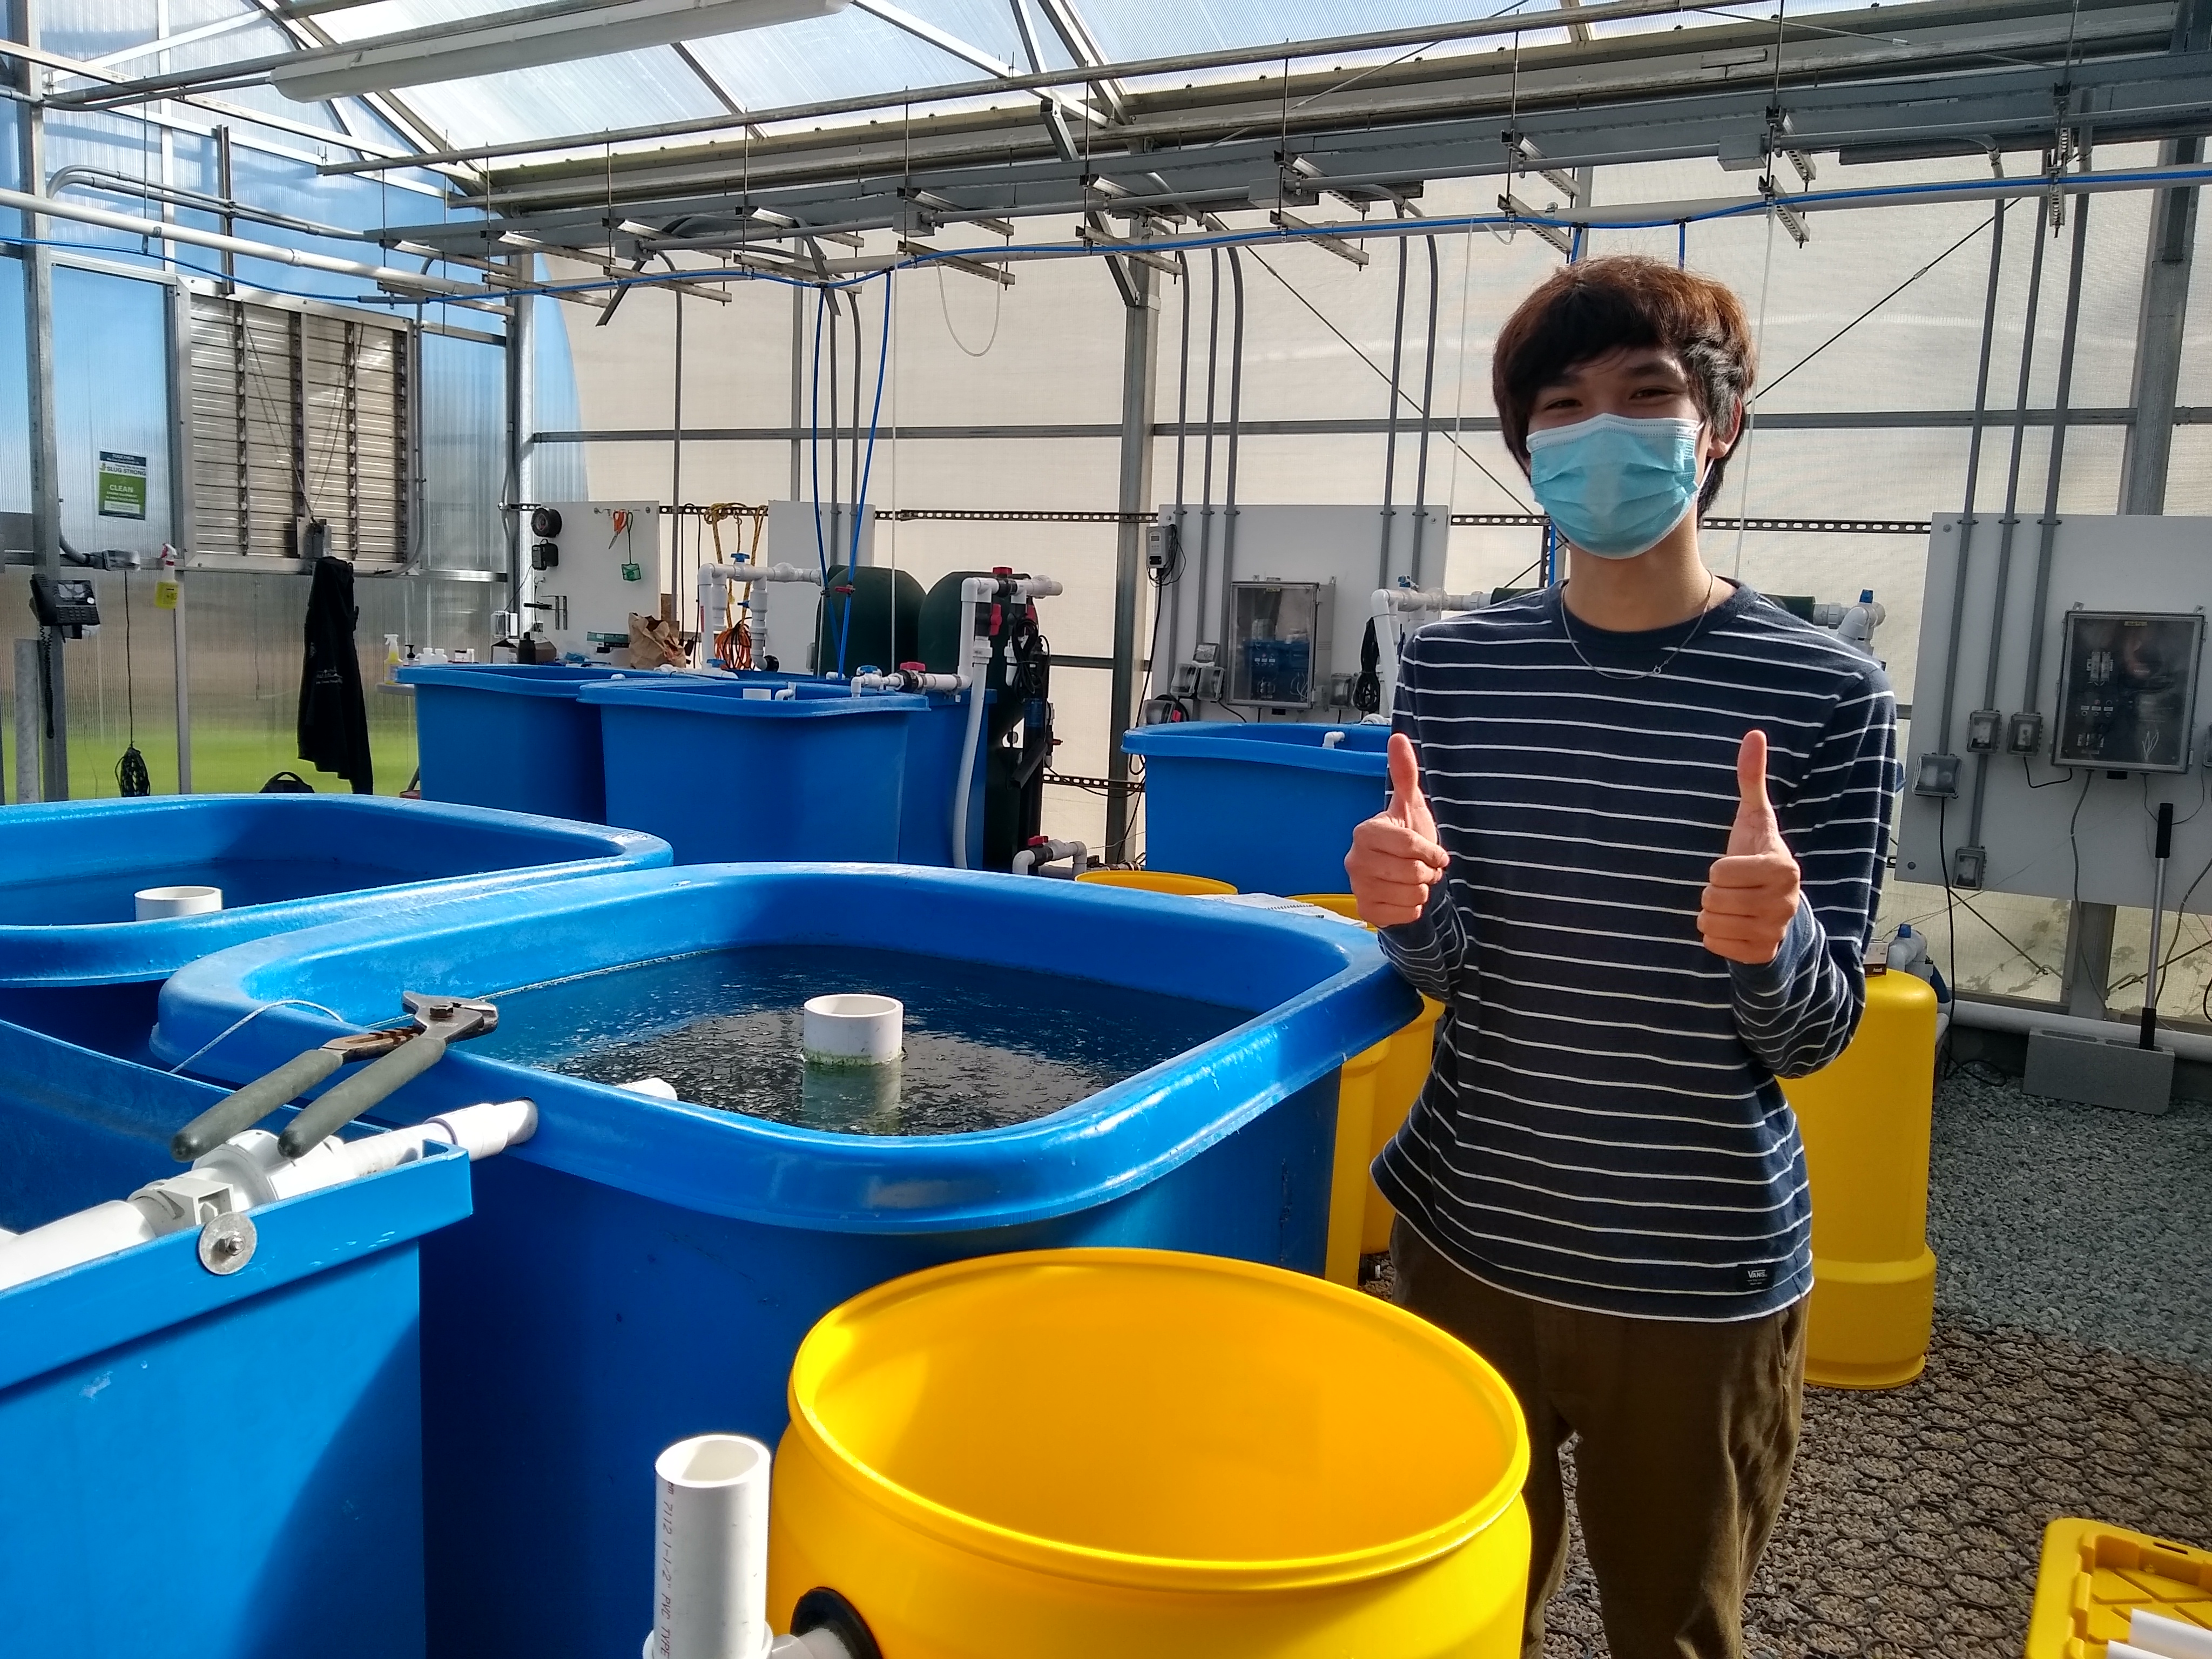 Students and our lab manager are setting up and taking water quality parameters in the ecological aquaculture greenhouse to start an experiment with live rainbow trout soon.